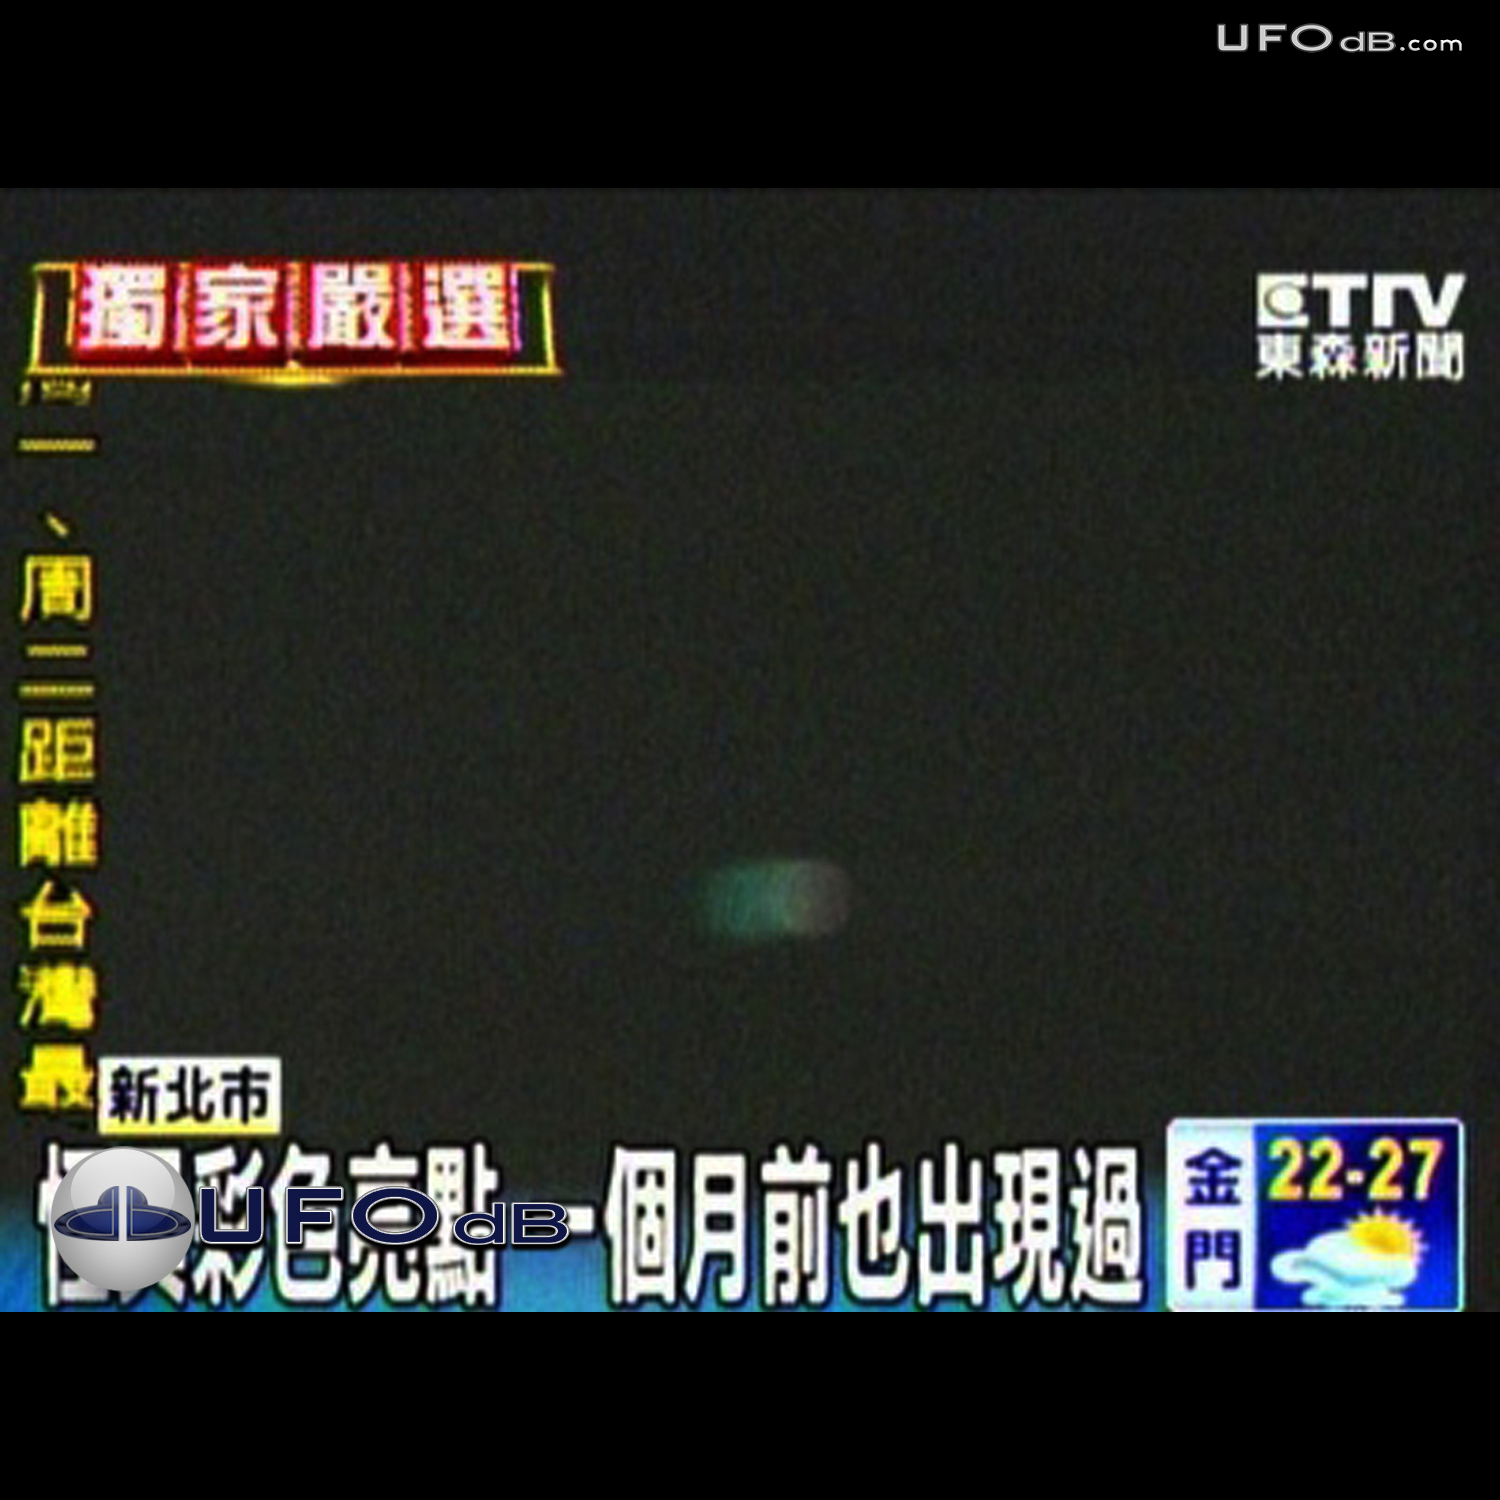 Taipei UFO picture shown on the local Television | Taiwan | May 7 2011 UFO Picture #287-1